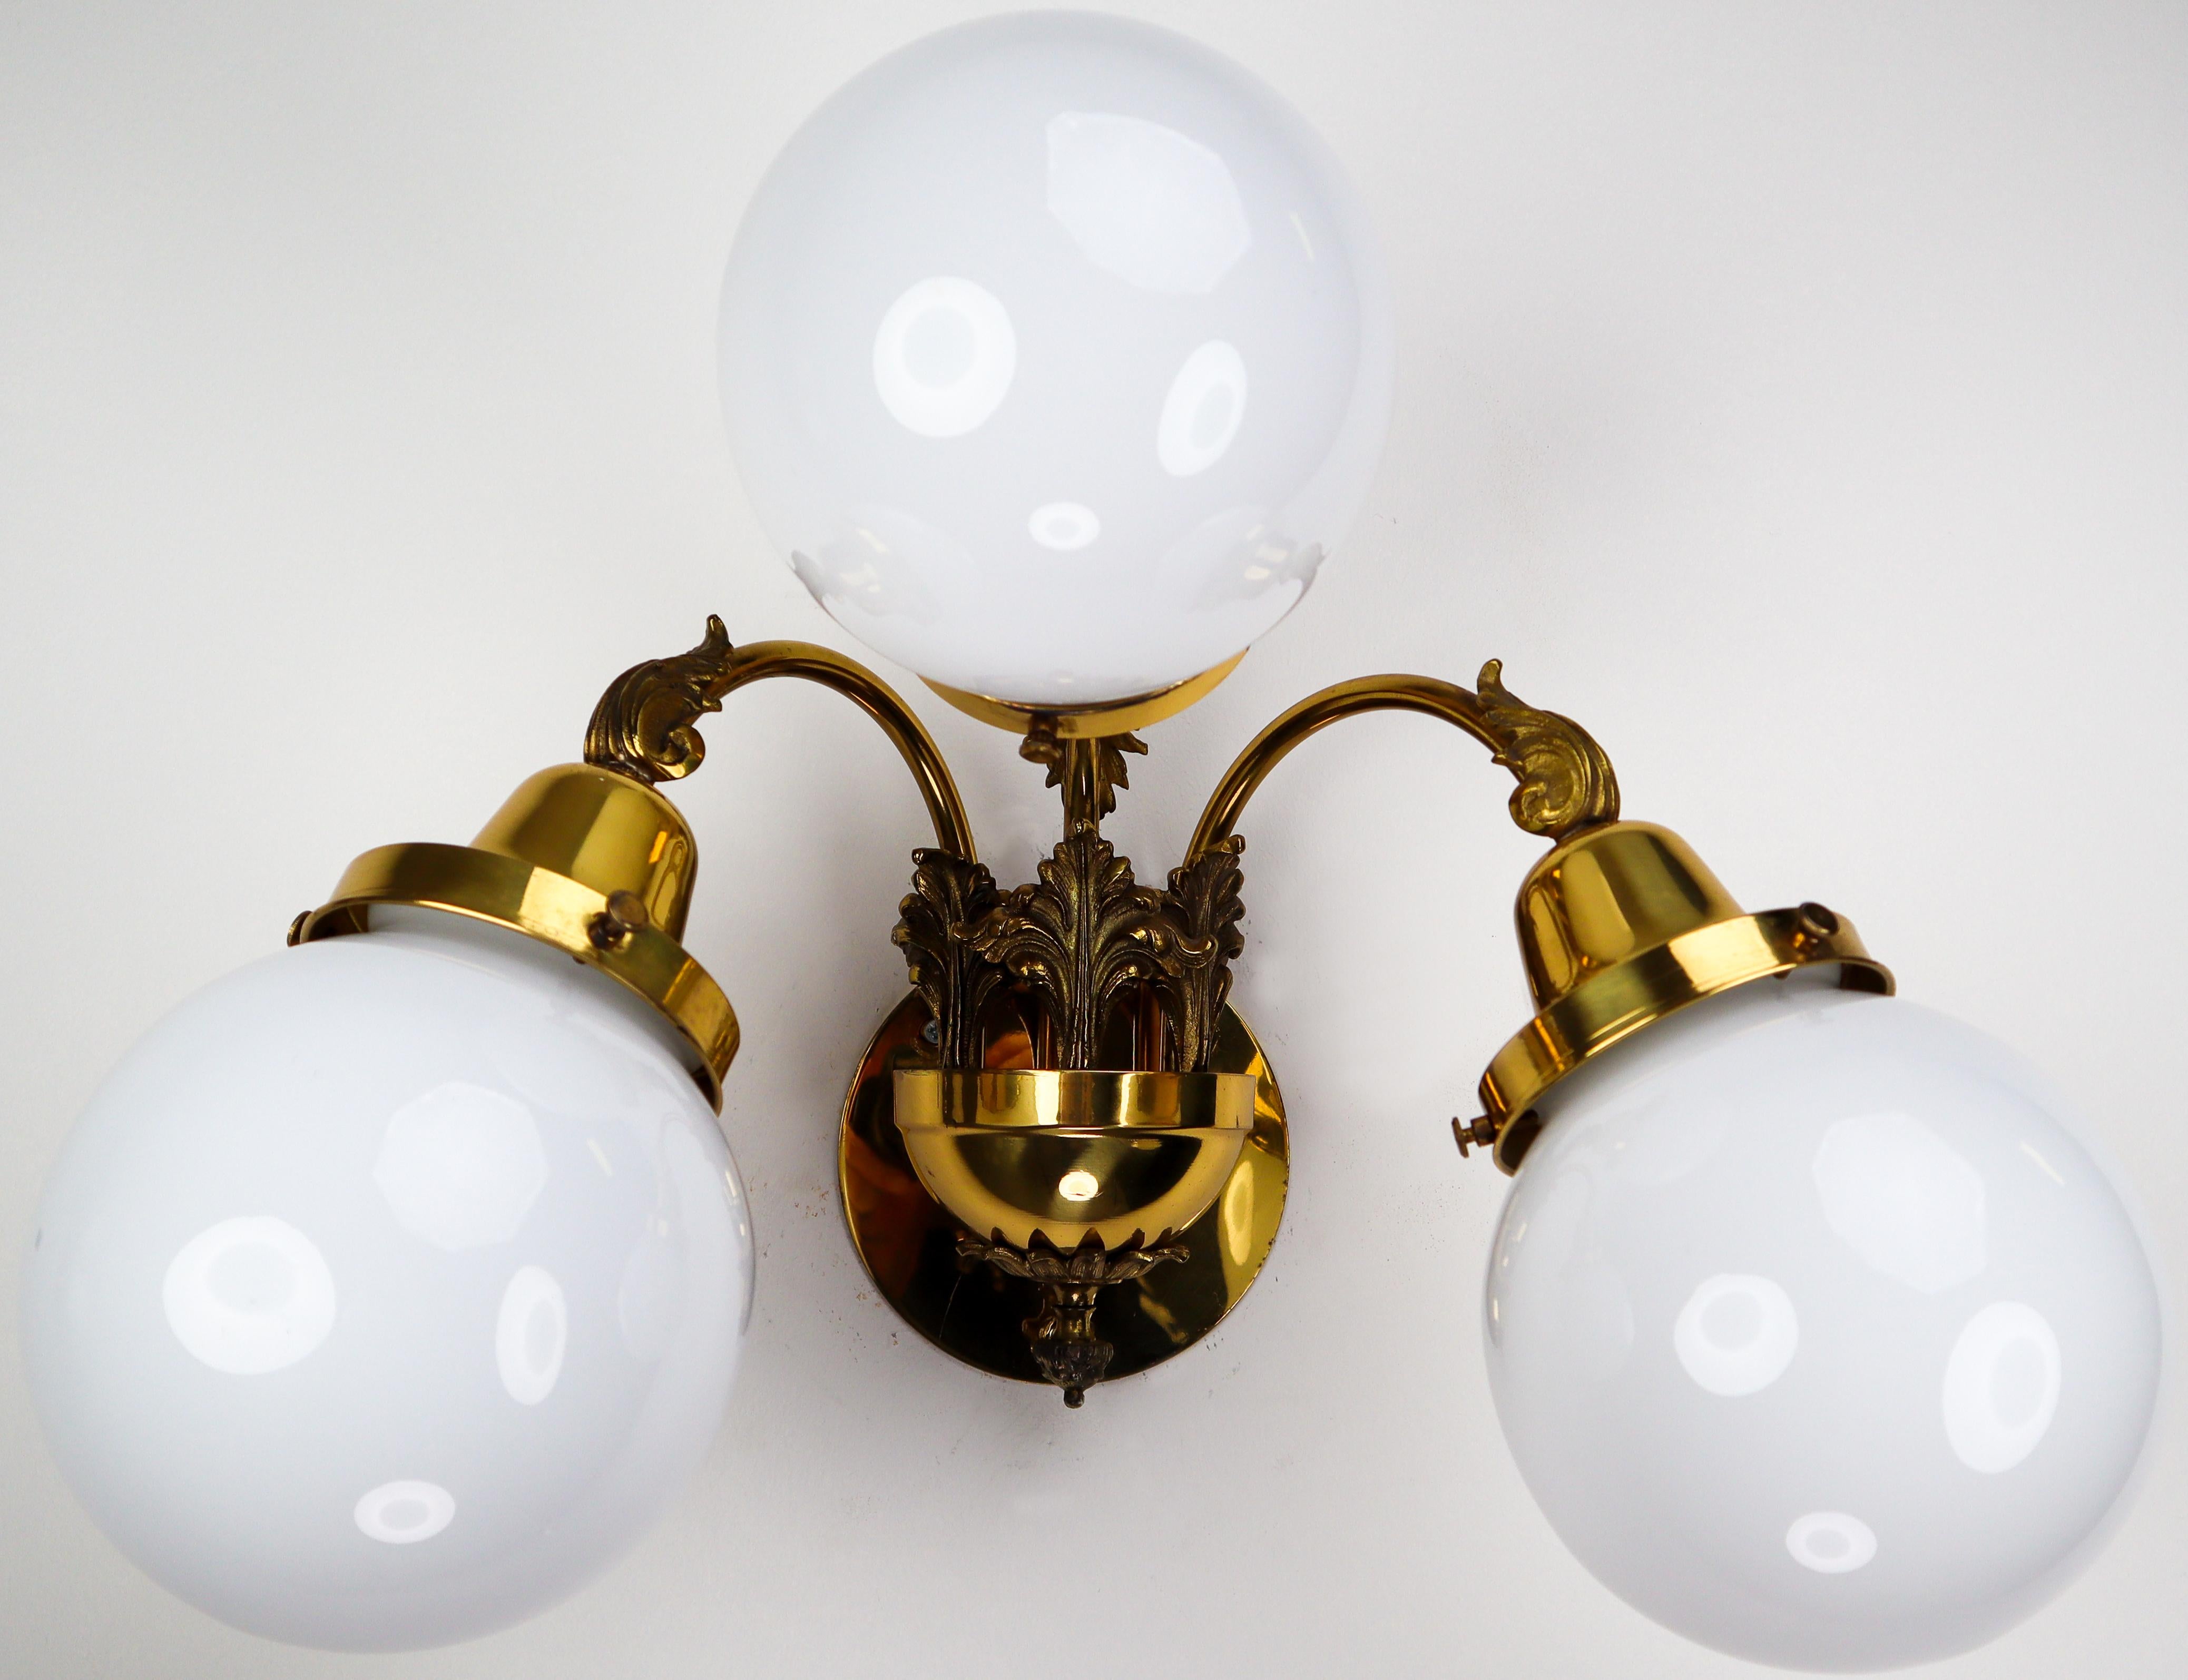 Monumental brass wall lights with opaline glass globes from the National Gallery Praque.

Monumental and chic design set of 16 chandeliers with high quality brass fixture and luxury opaline glass globes. These wall lights with brass frame consist